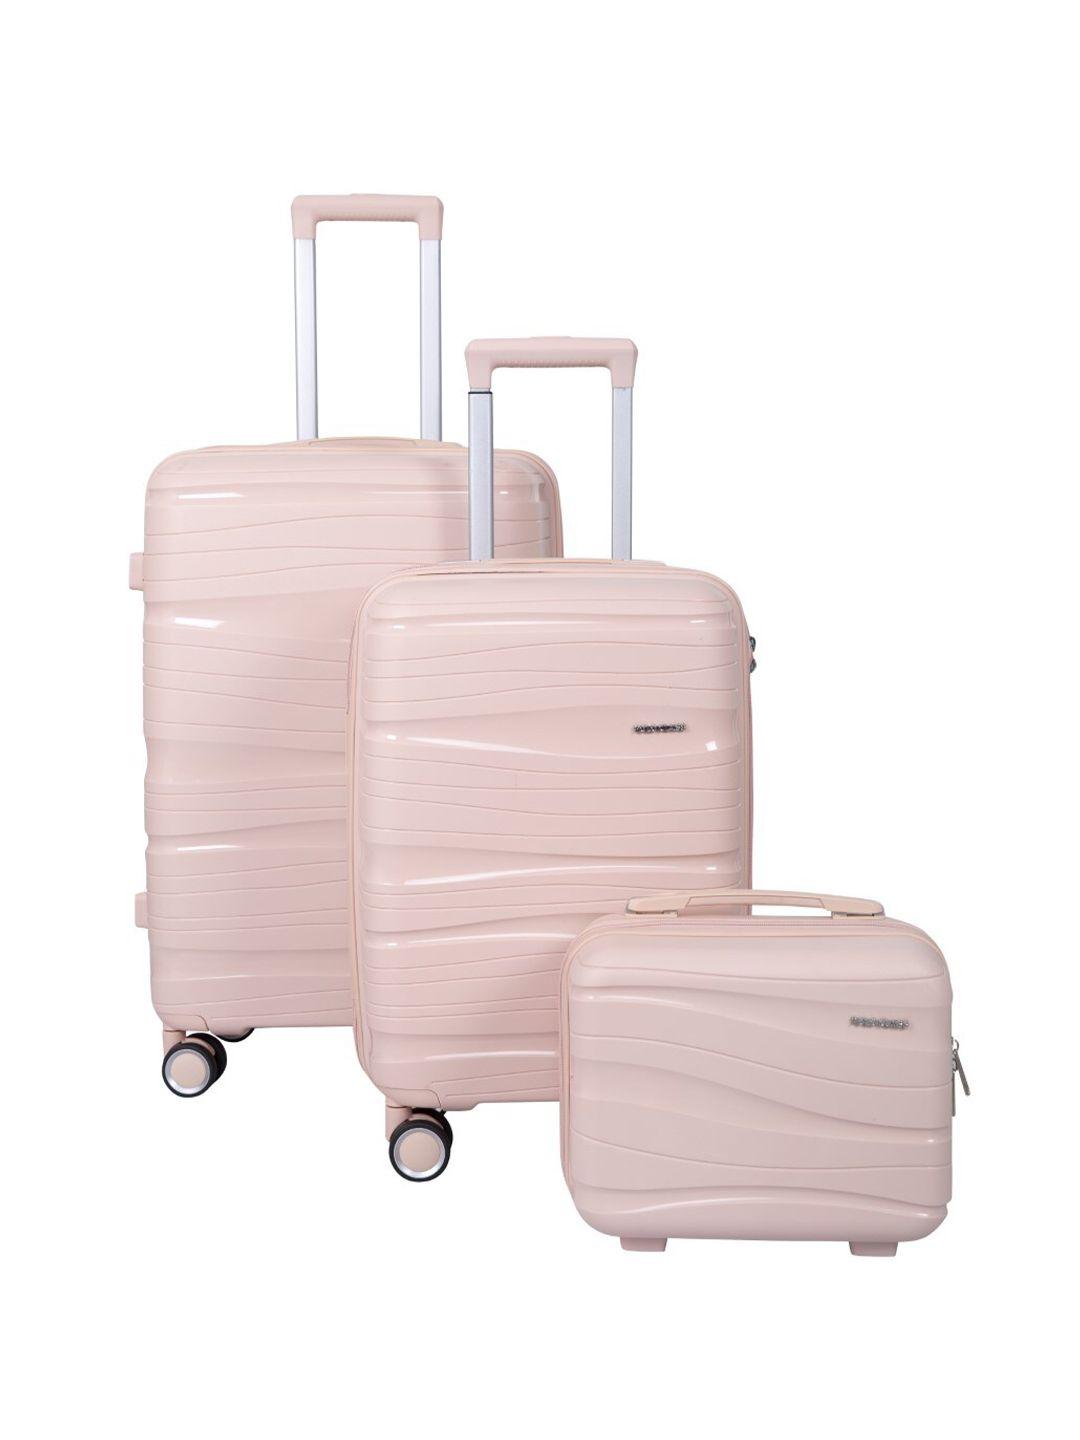 polo class set of 3 hard-sided trolley suitcase-51-100 l